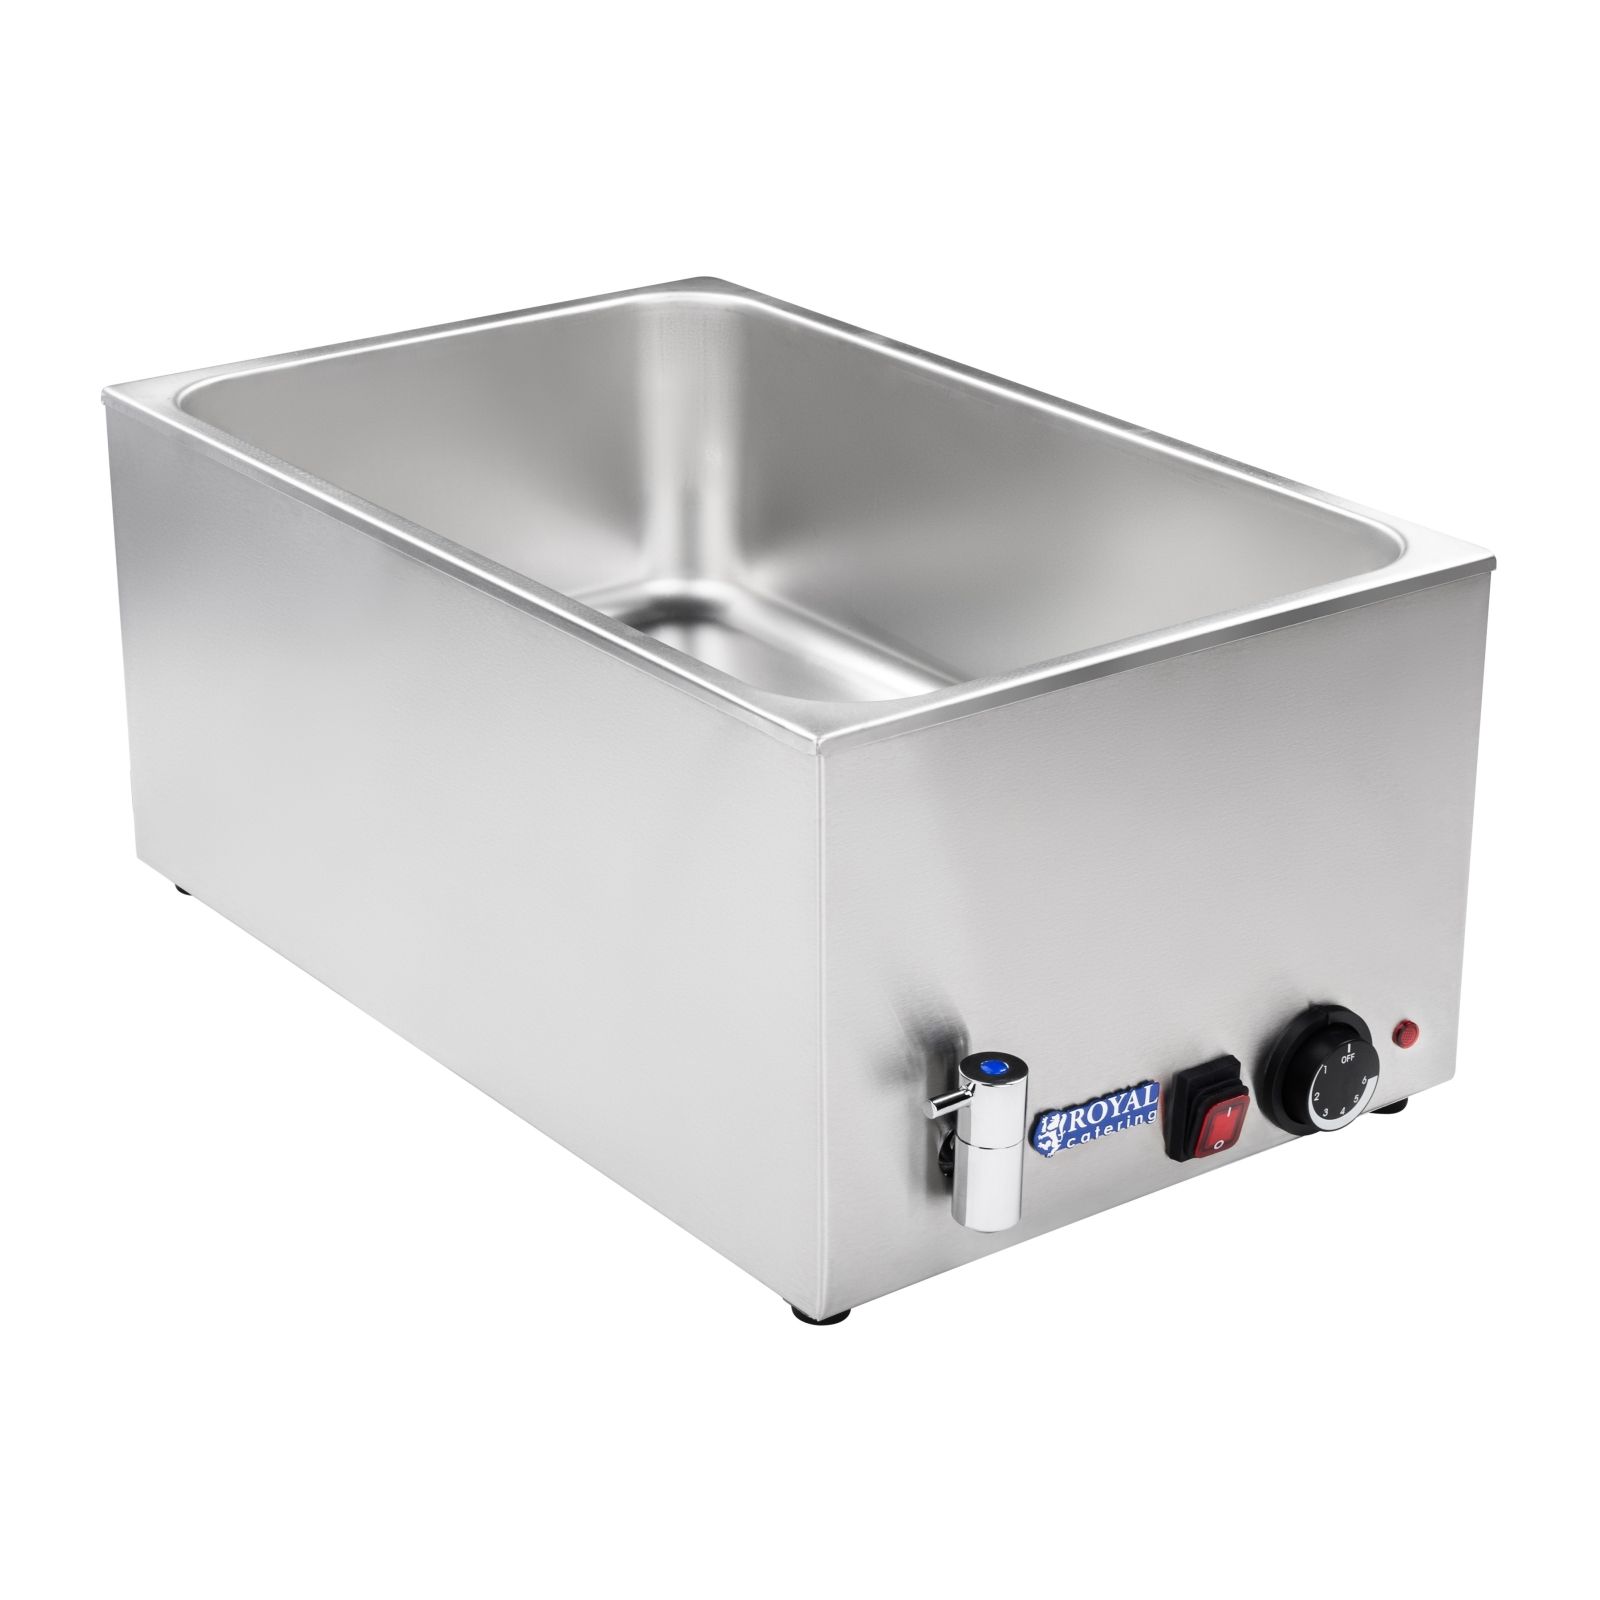 Royal Catering Bain-marie - GN 1/1 - without container - drain tap RCBM-1/1-150A